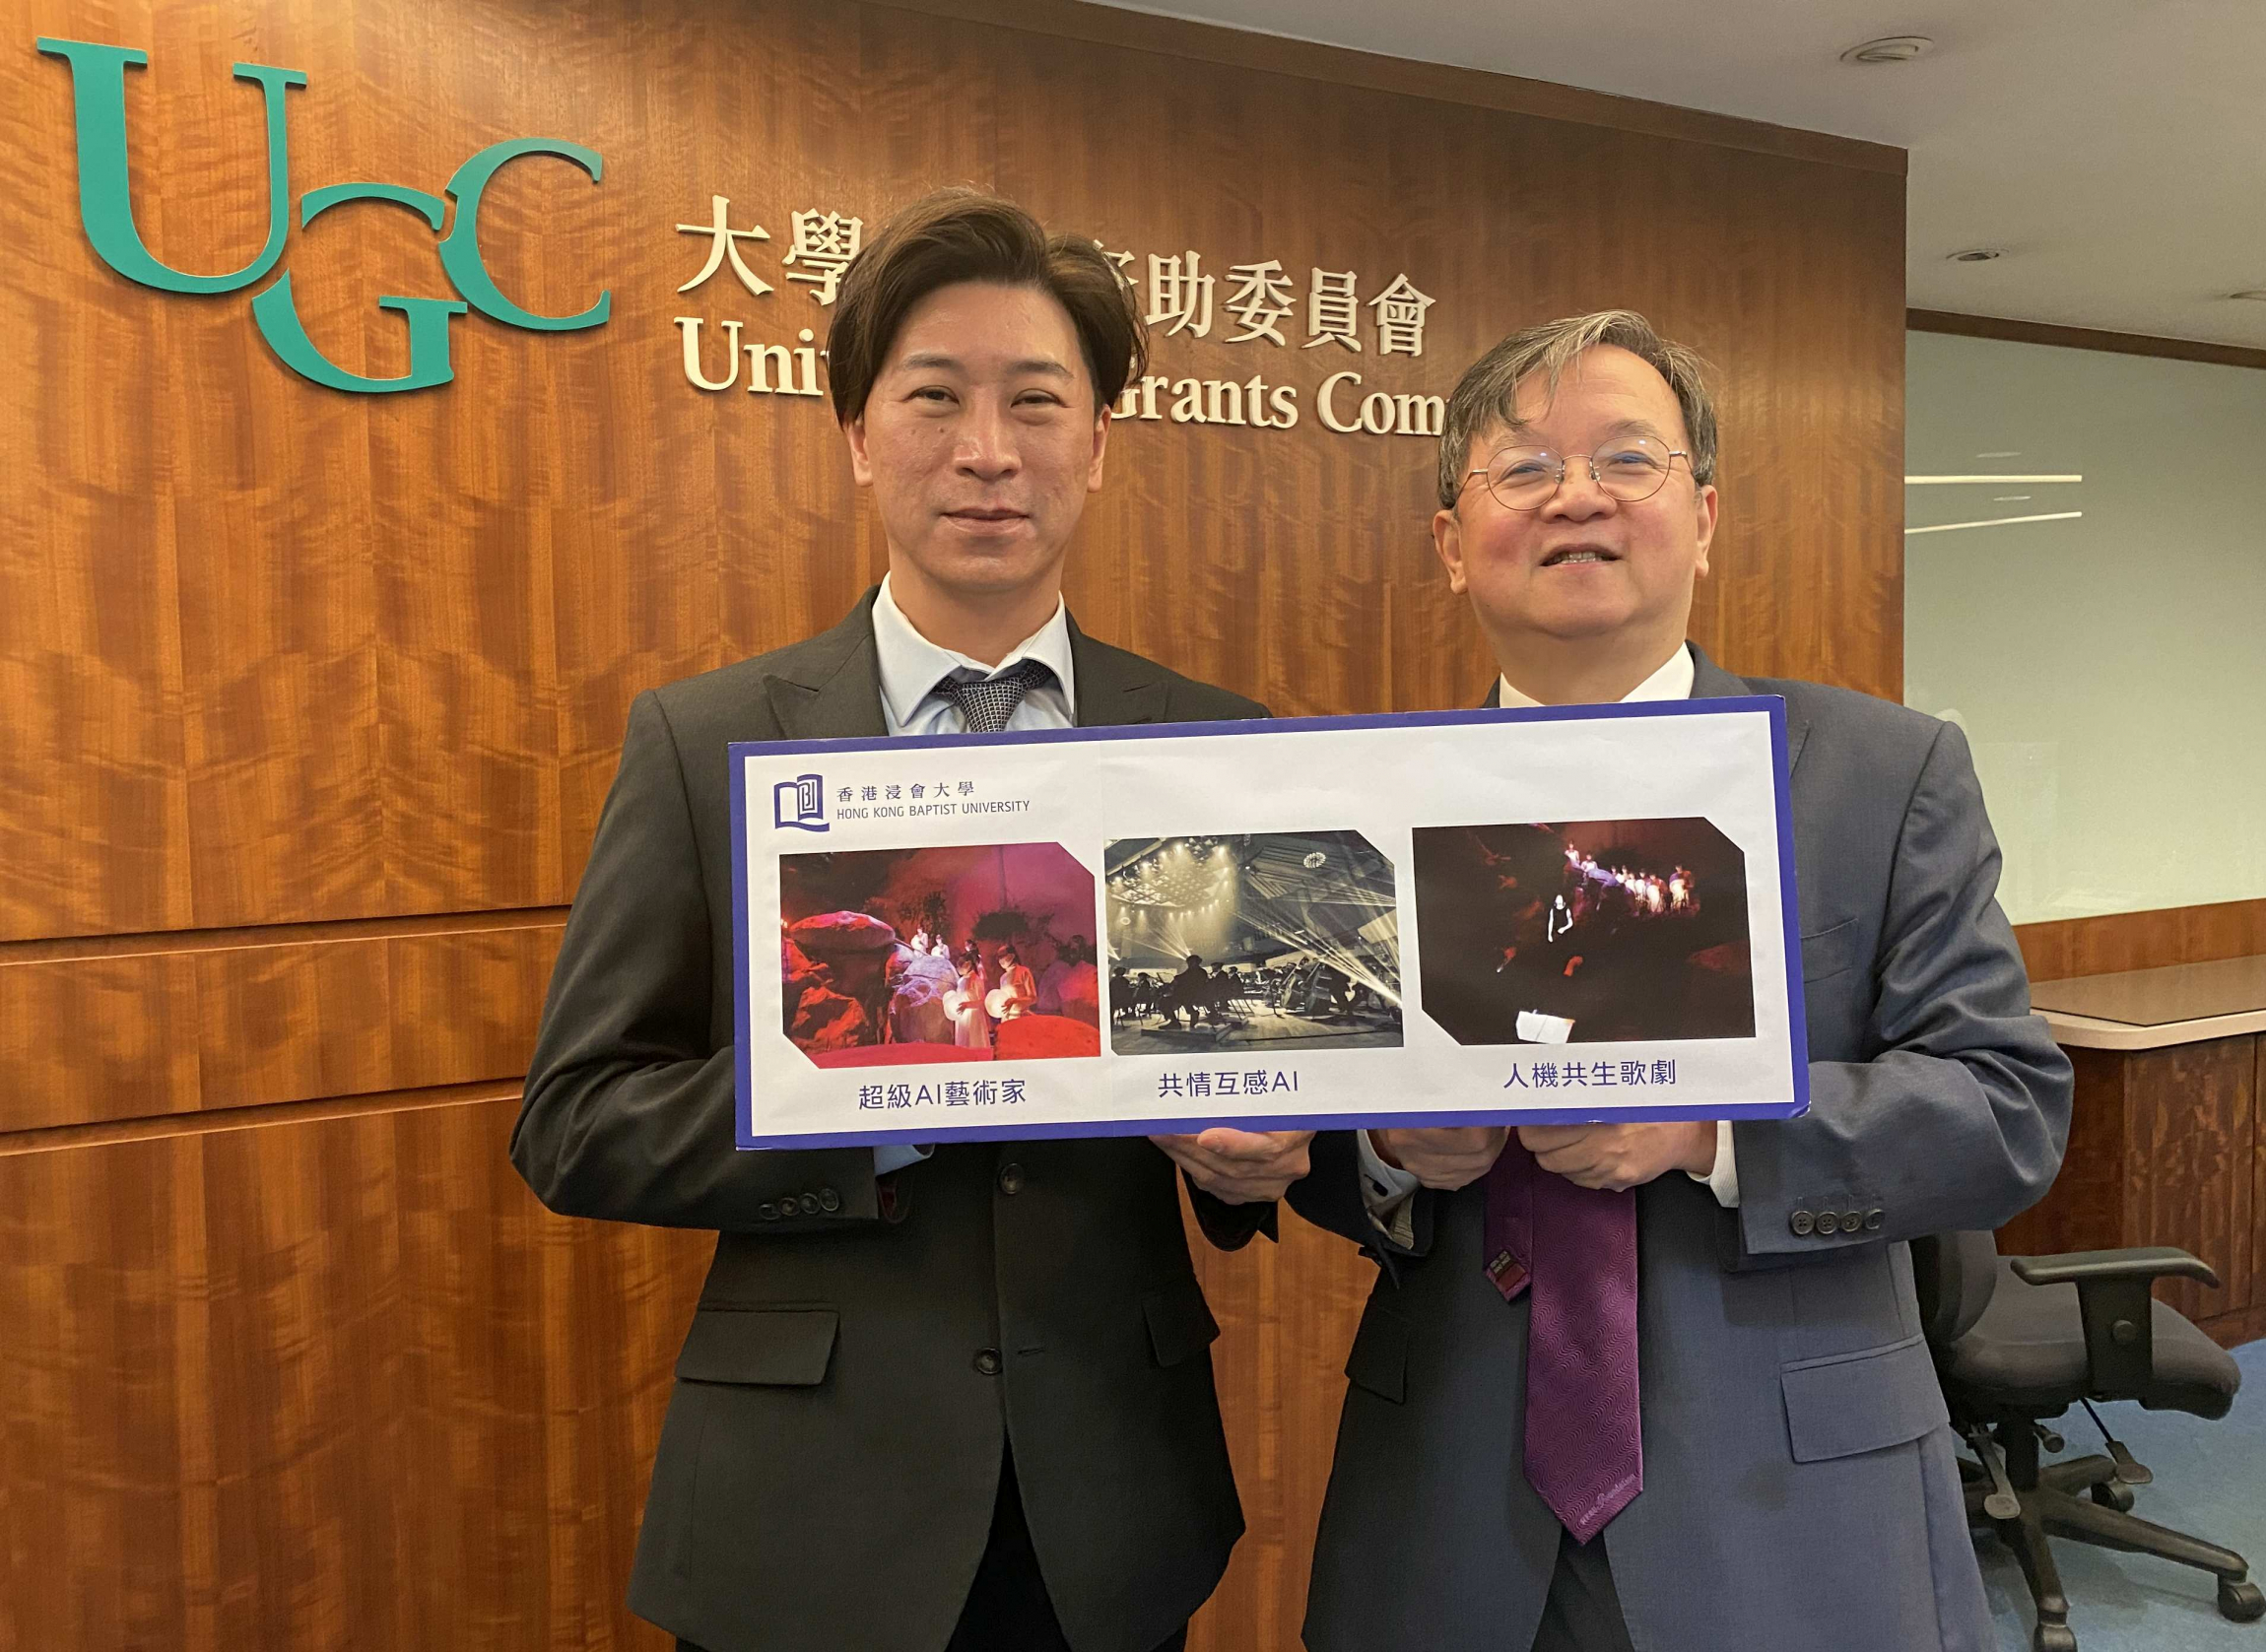 The research team led by Professor Guo Yike, Vice-President (Research and Development) (right) and Professor Johnny M Poon, Associate Vice-President (Interdisciplinary Research) at HKBU has been awarded HK$52.8 million in research funding from RGC to develop platform technologies for symbiotic creativity.